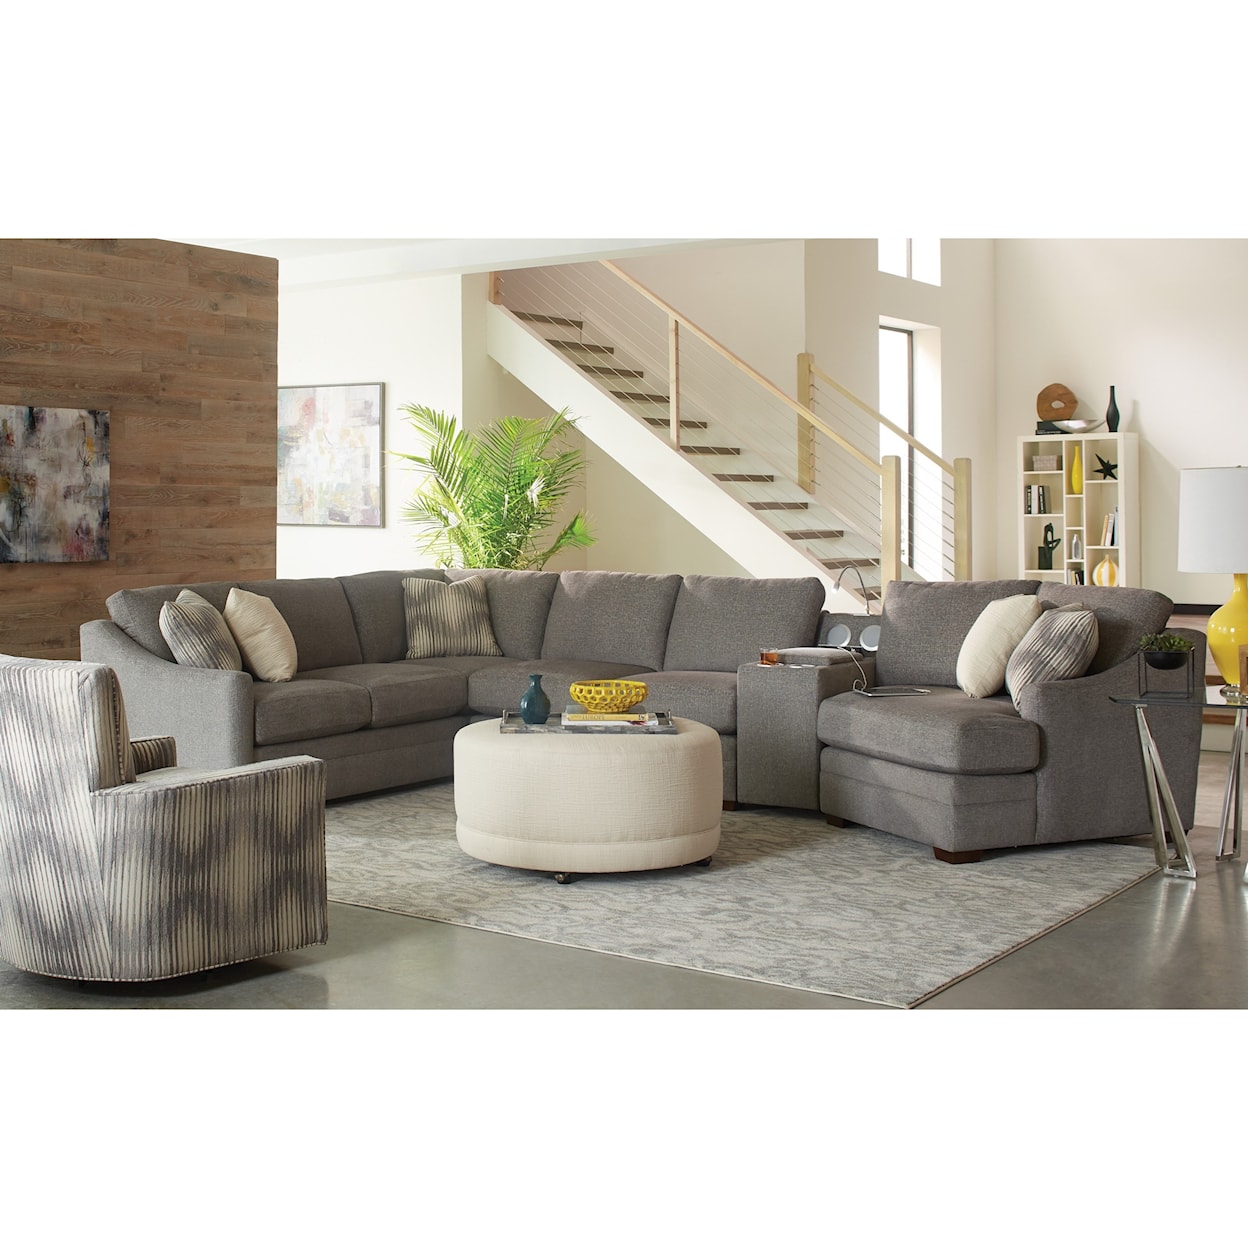 Craftmaster F9 Custom Collection 4 pc Sectional Sofa w/ Power Console